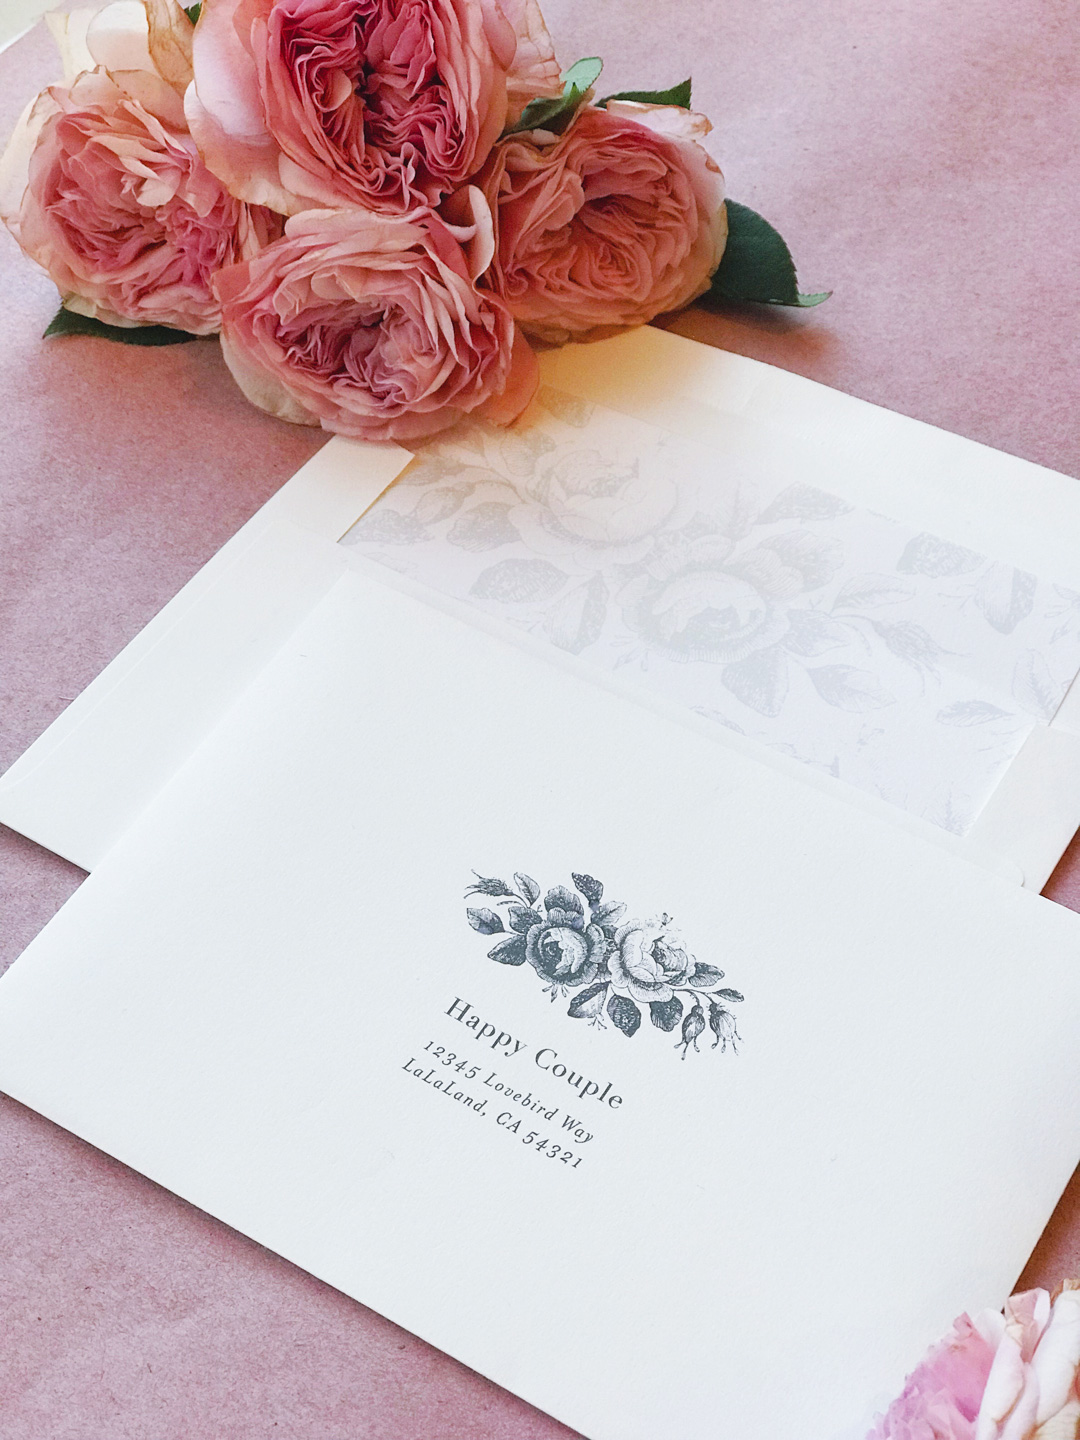 Addressed envelopes by Minted for Jackie Roque's wedding.